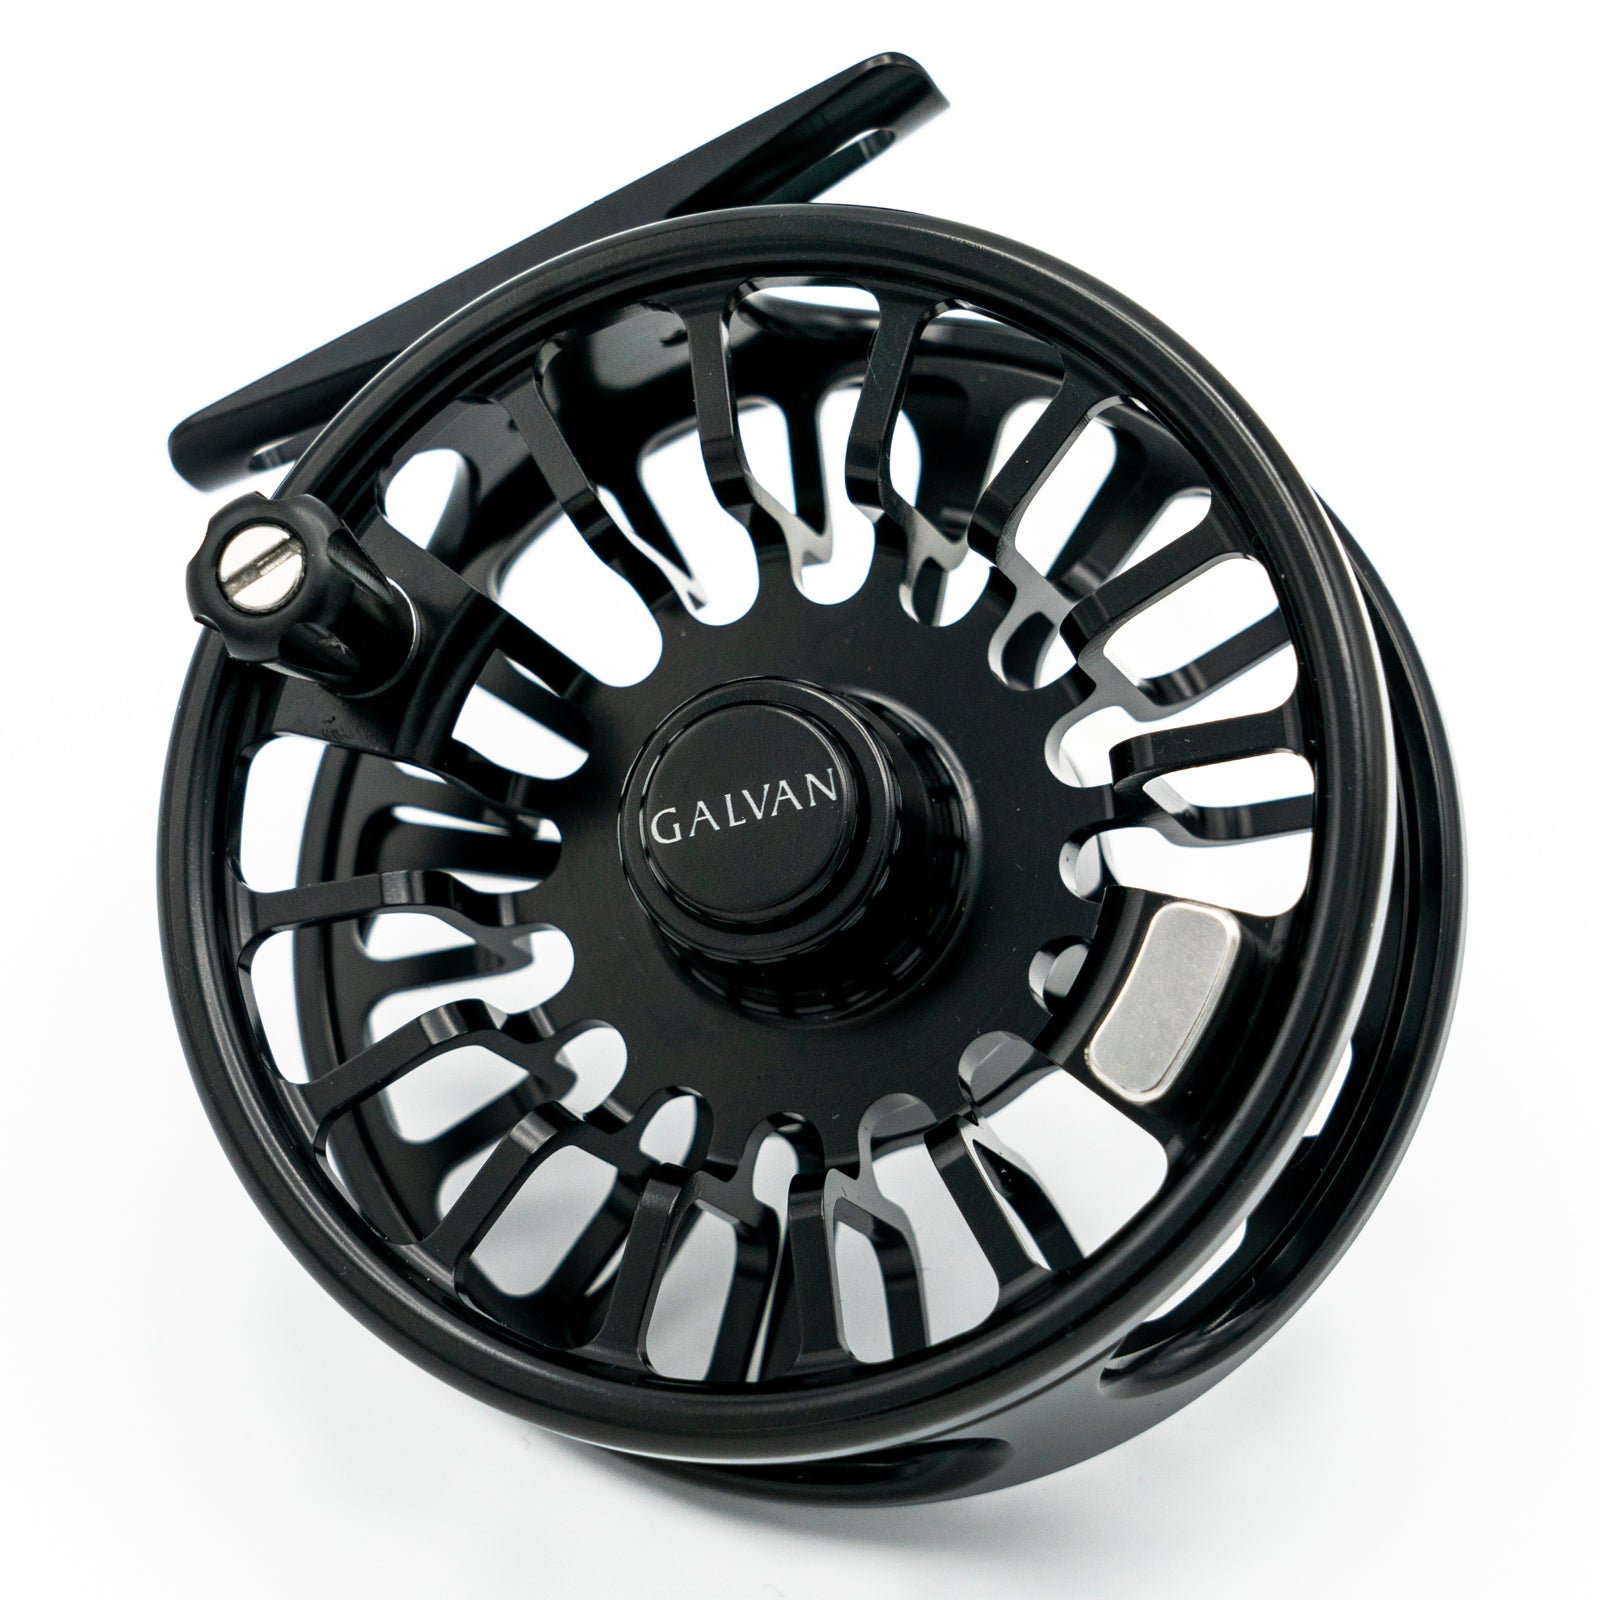 Fly Reels – Emerald Water Anglers